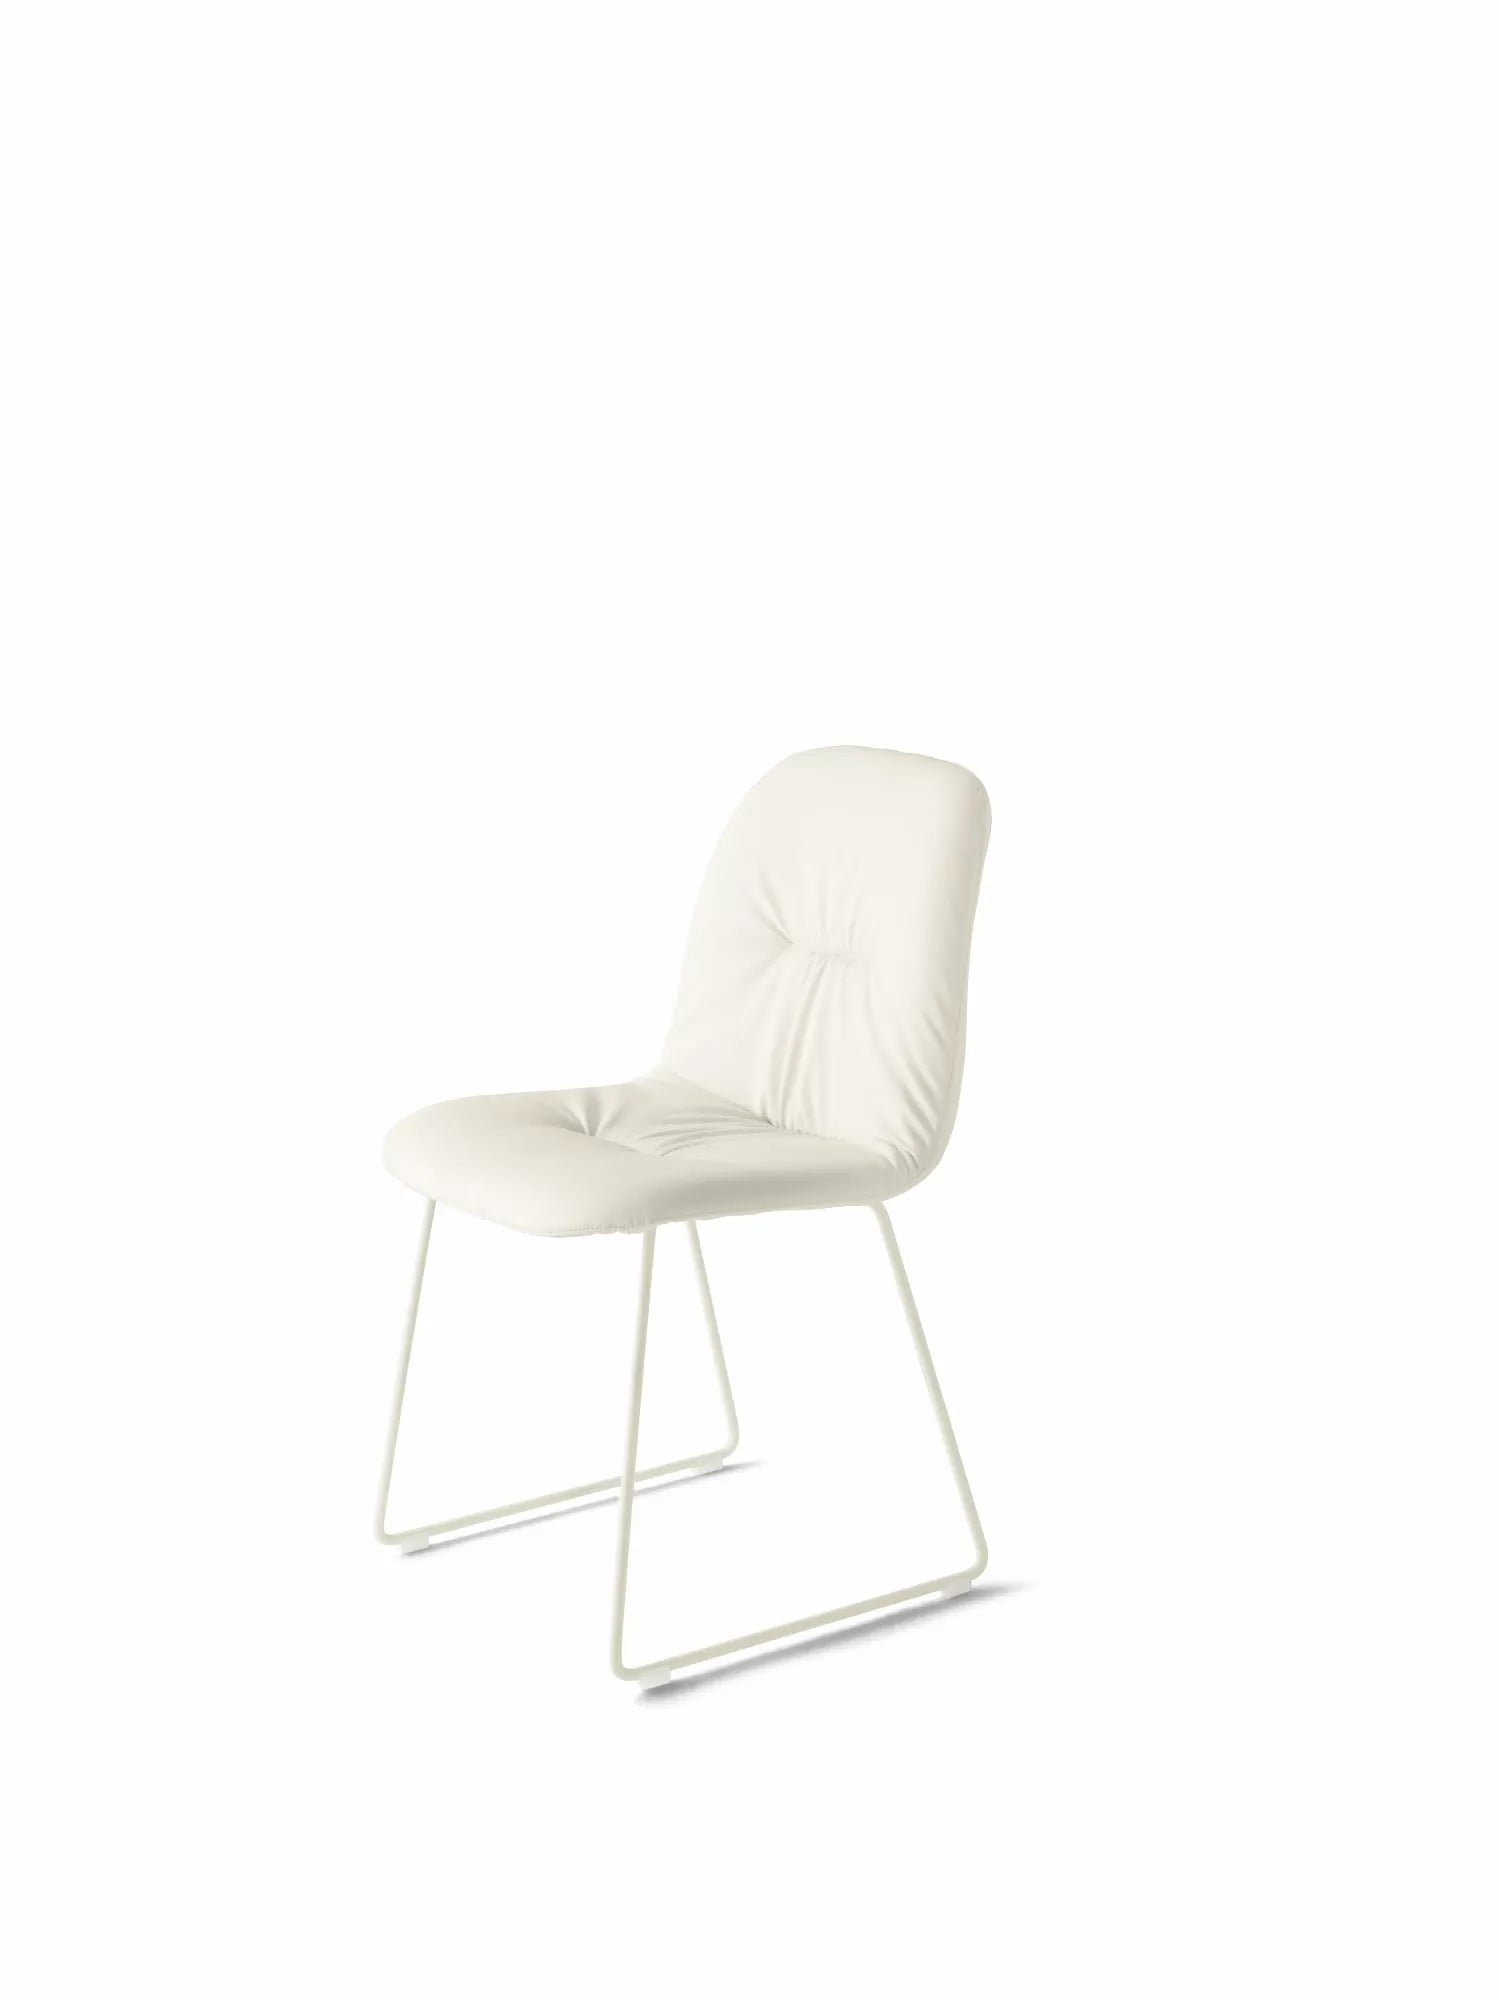 Chantal Chair with round rod metal frame